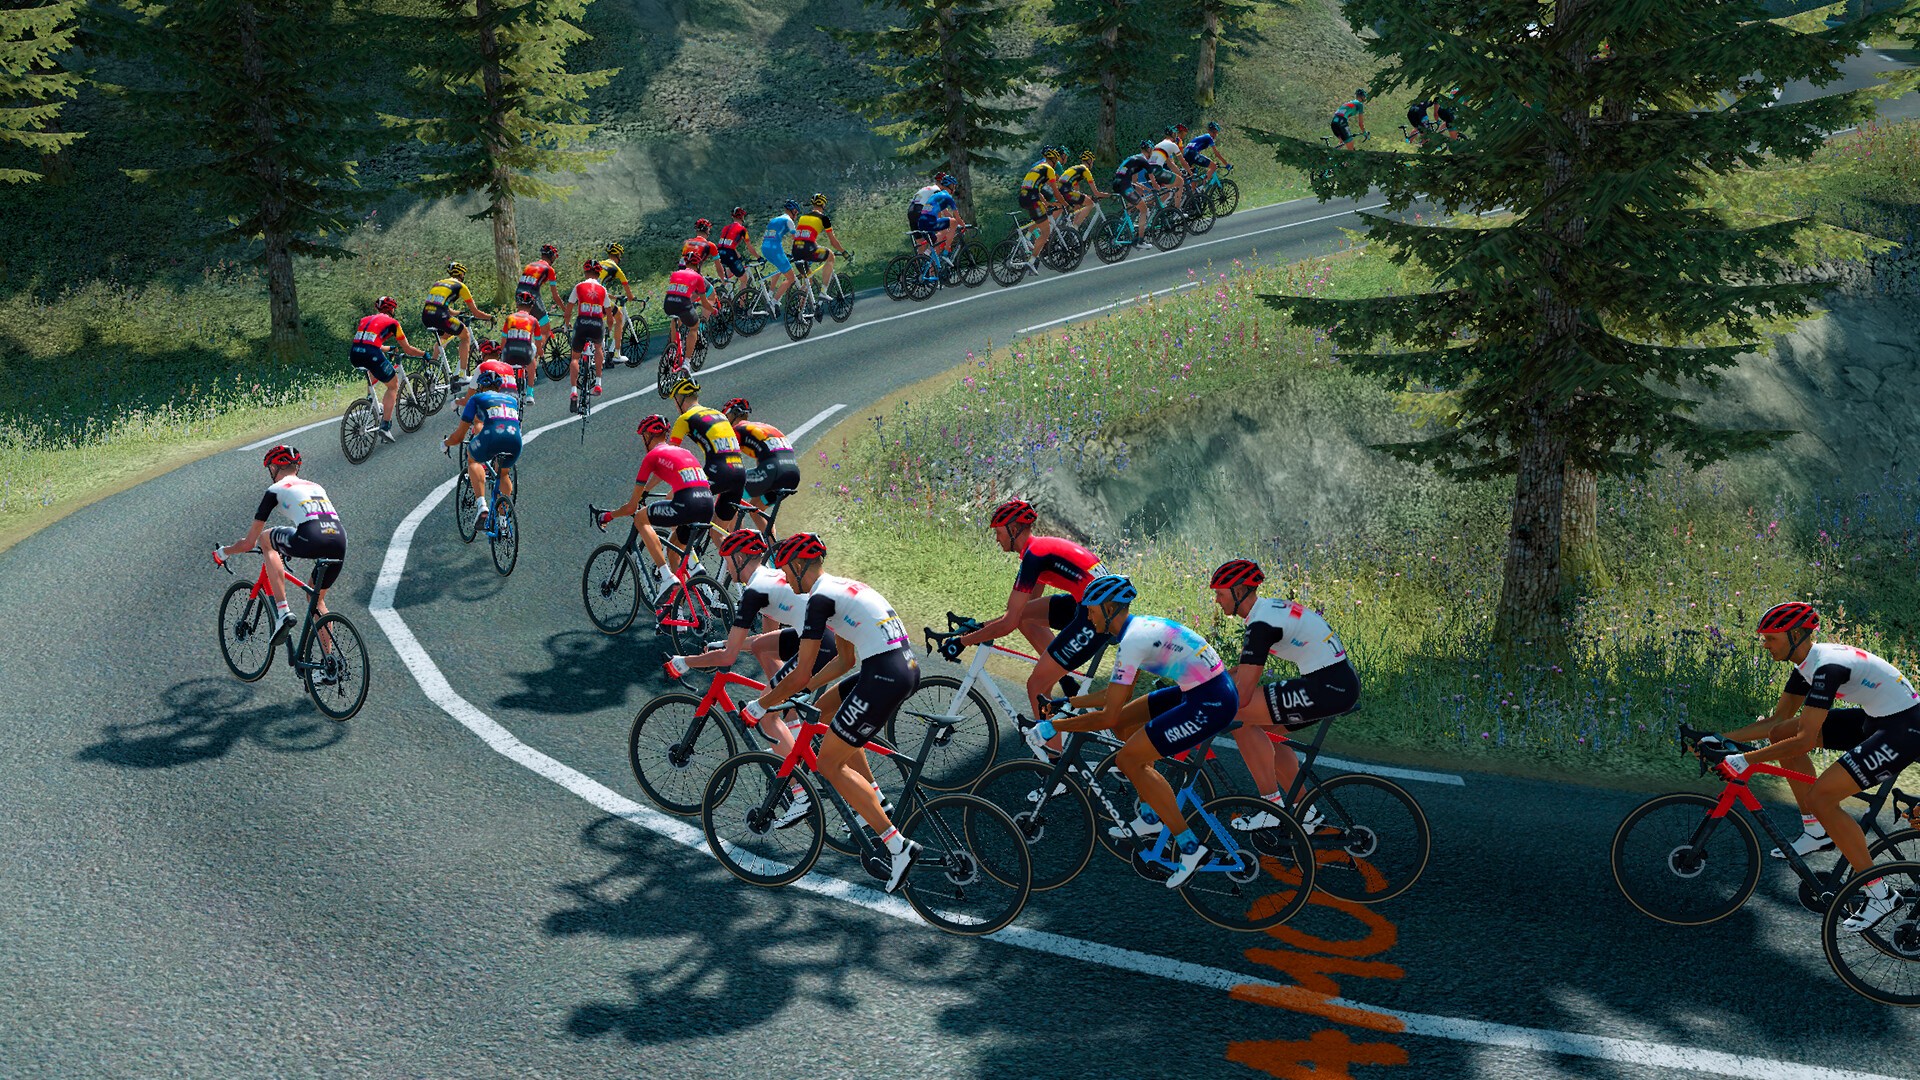 Pro Cycling Manager 2023 PC